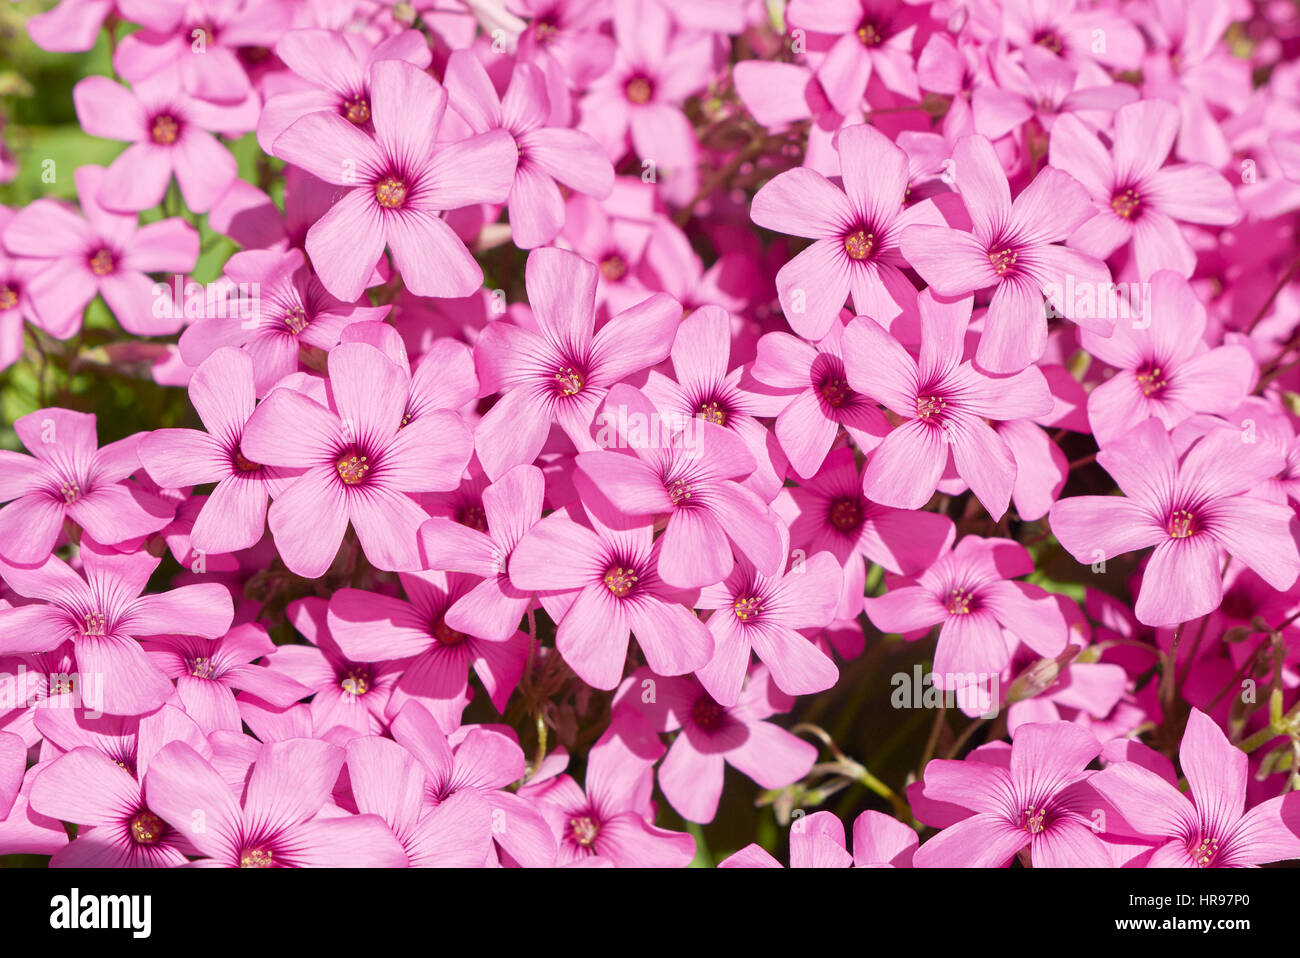 Oxalis articulate close up Stock Photo